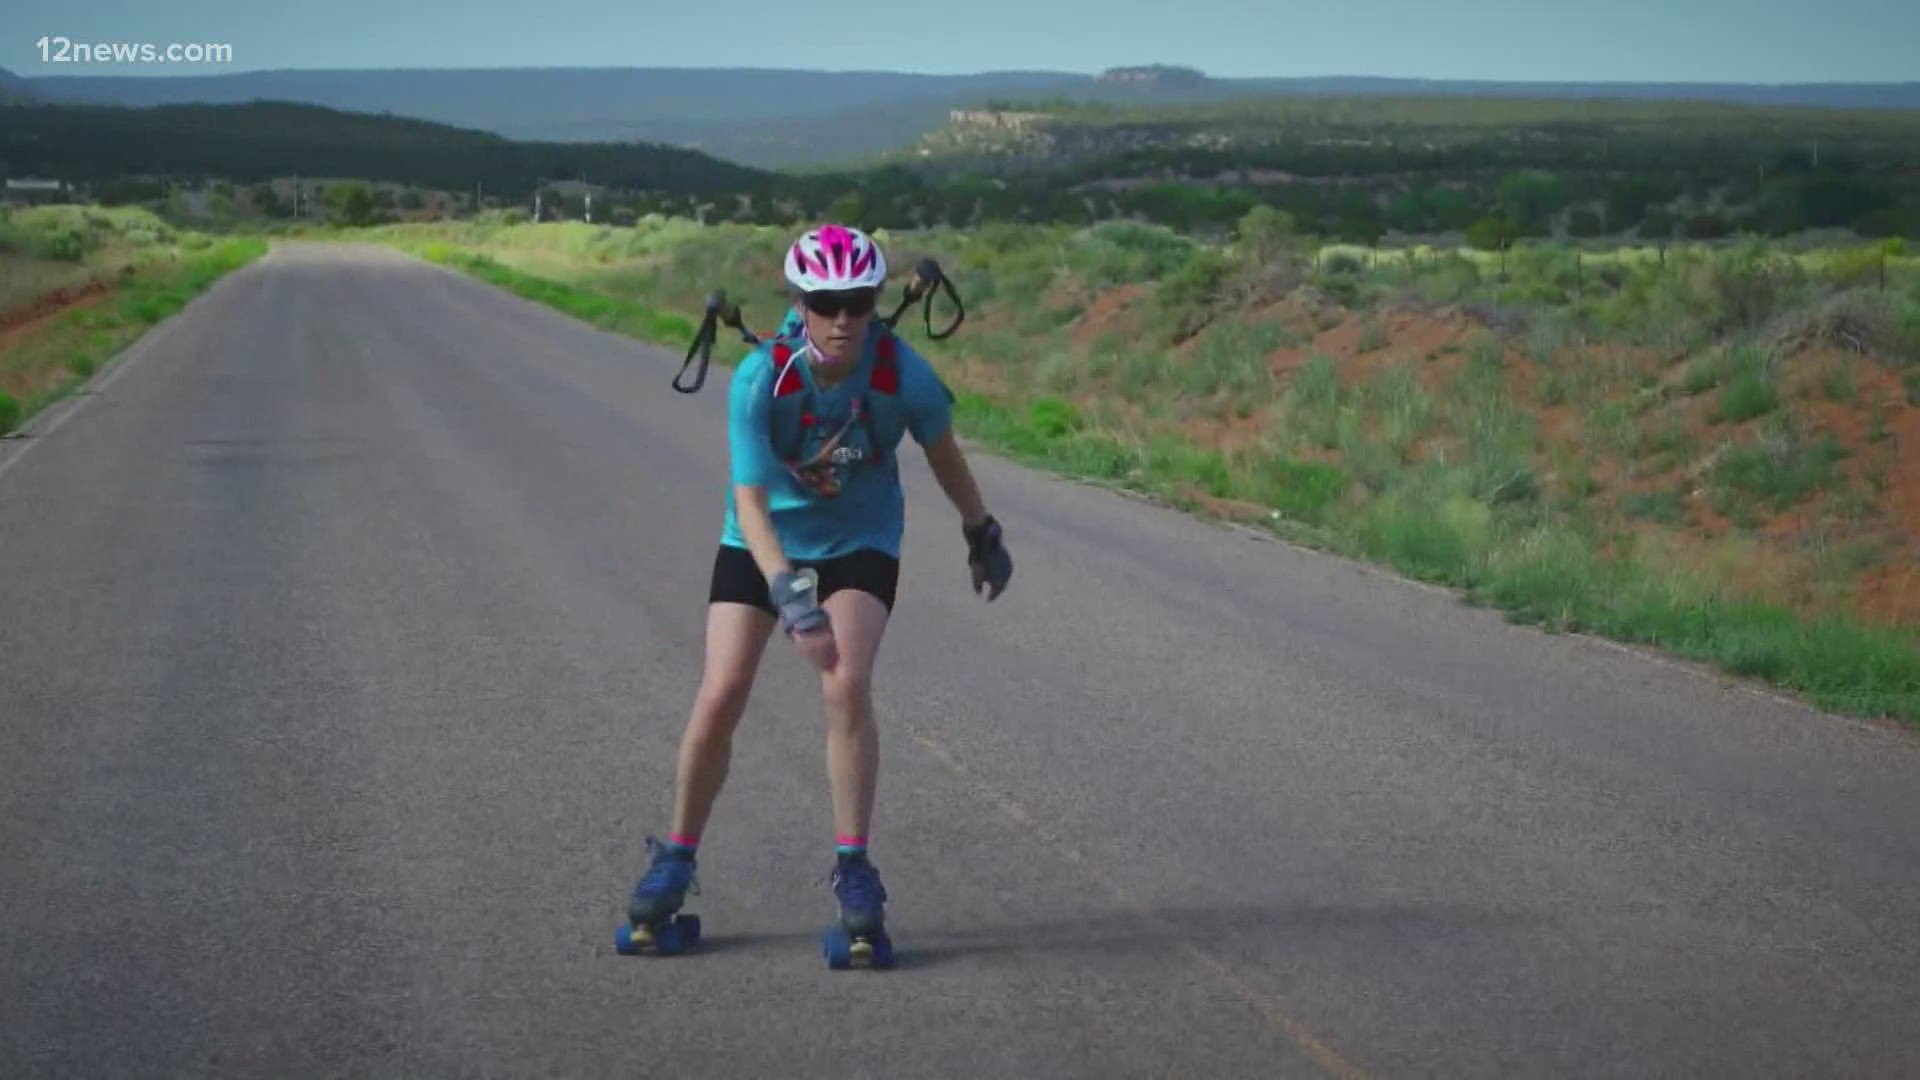 Daisy Purdy is roller skating more than 2,000 miles from the Navajo Nation to raise awareness for Navajo communities affected by environmental pollution and COVID-19